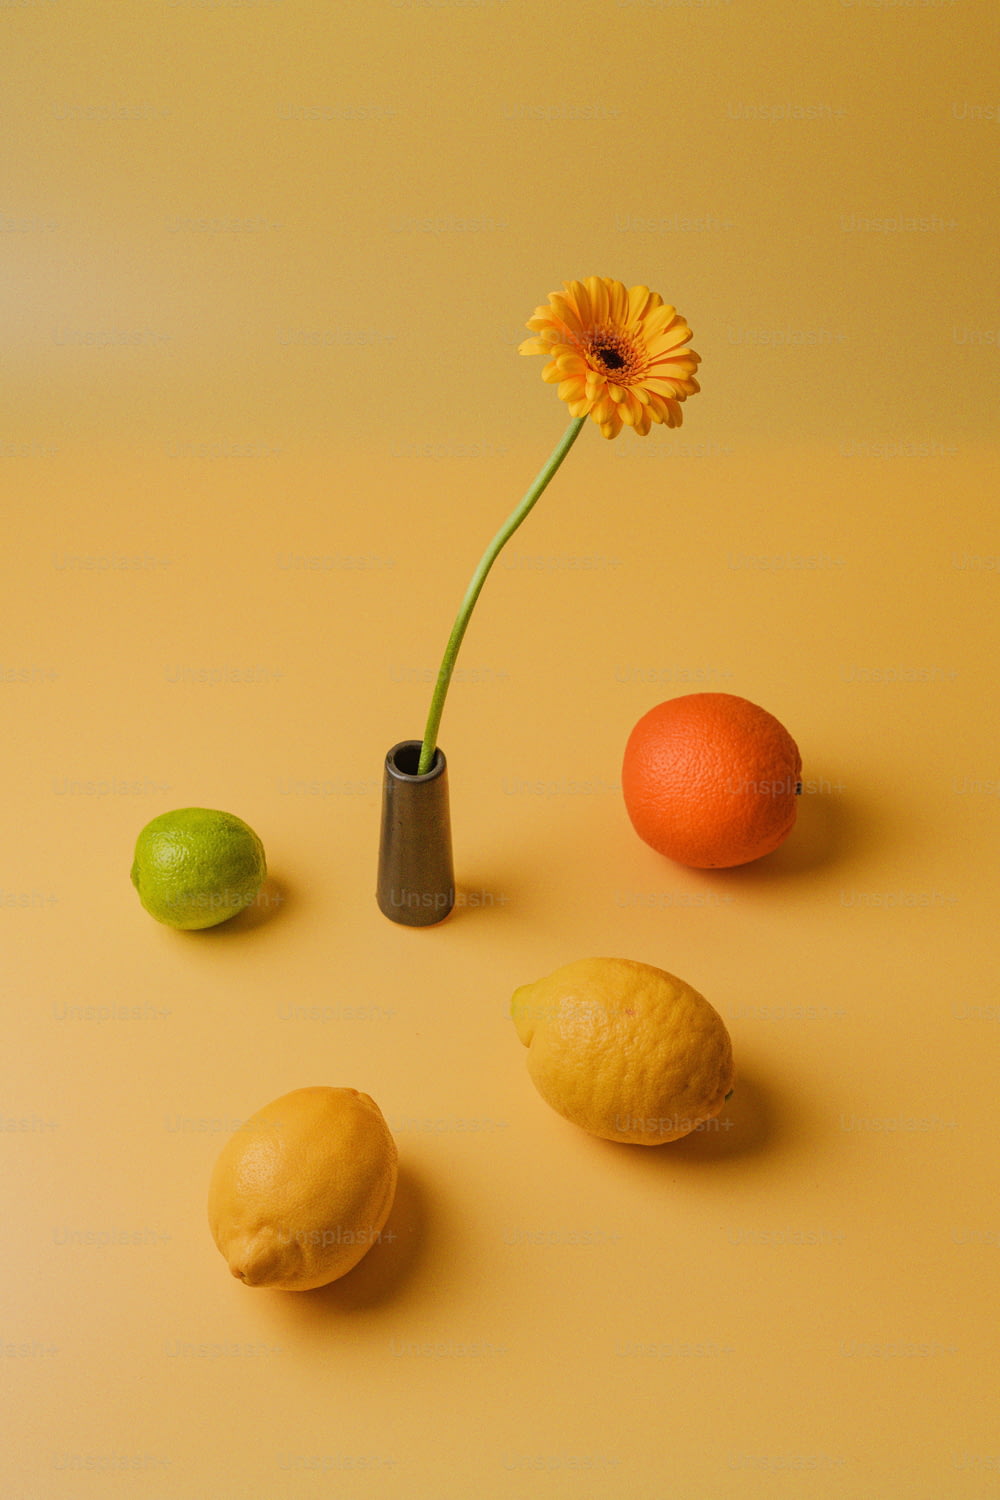 a flower in a vase next to lemons and an orange